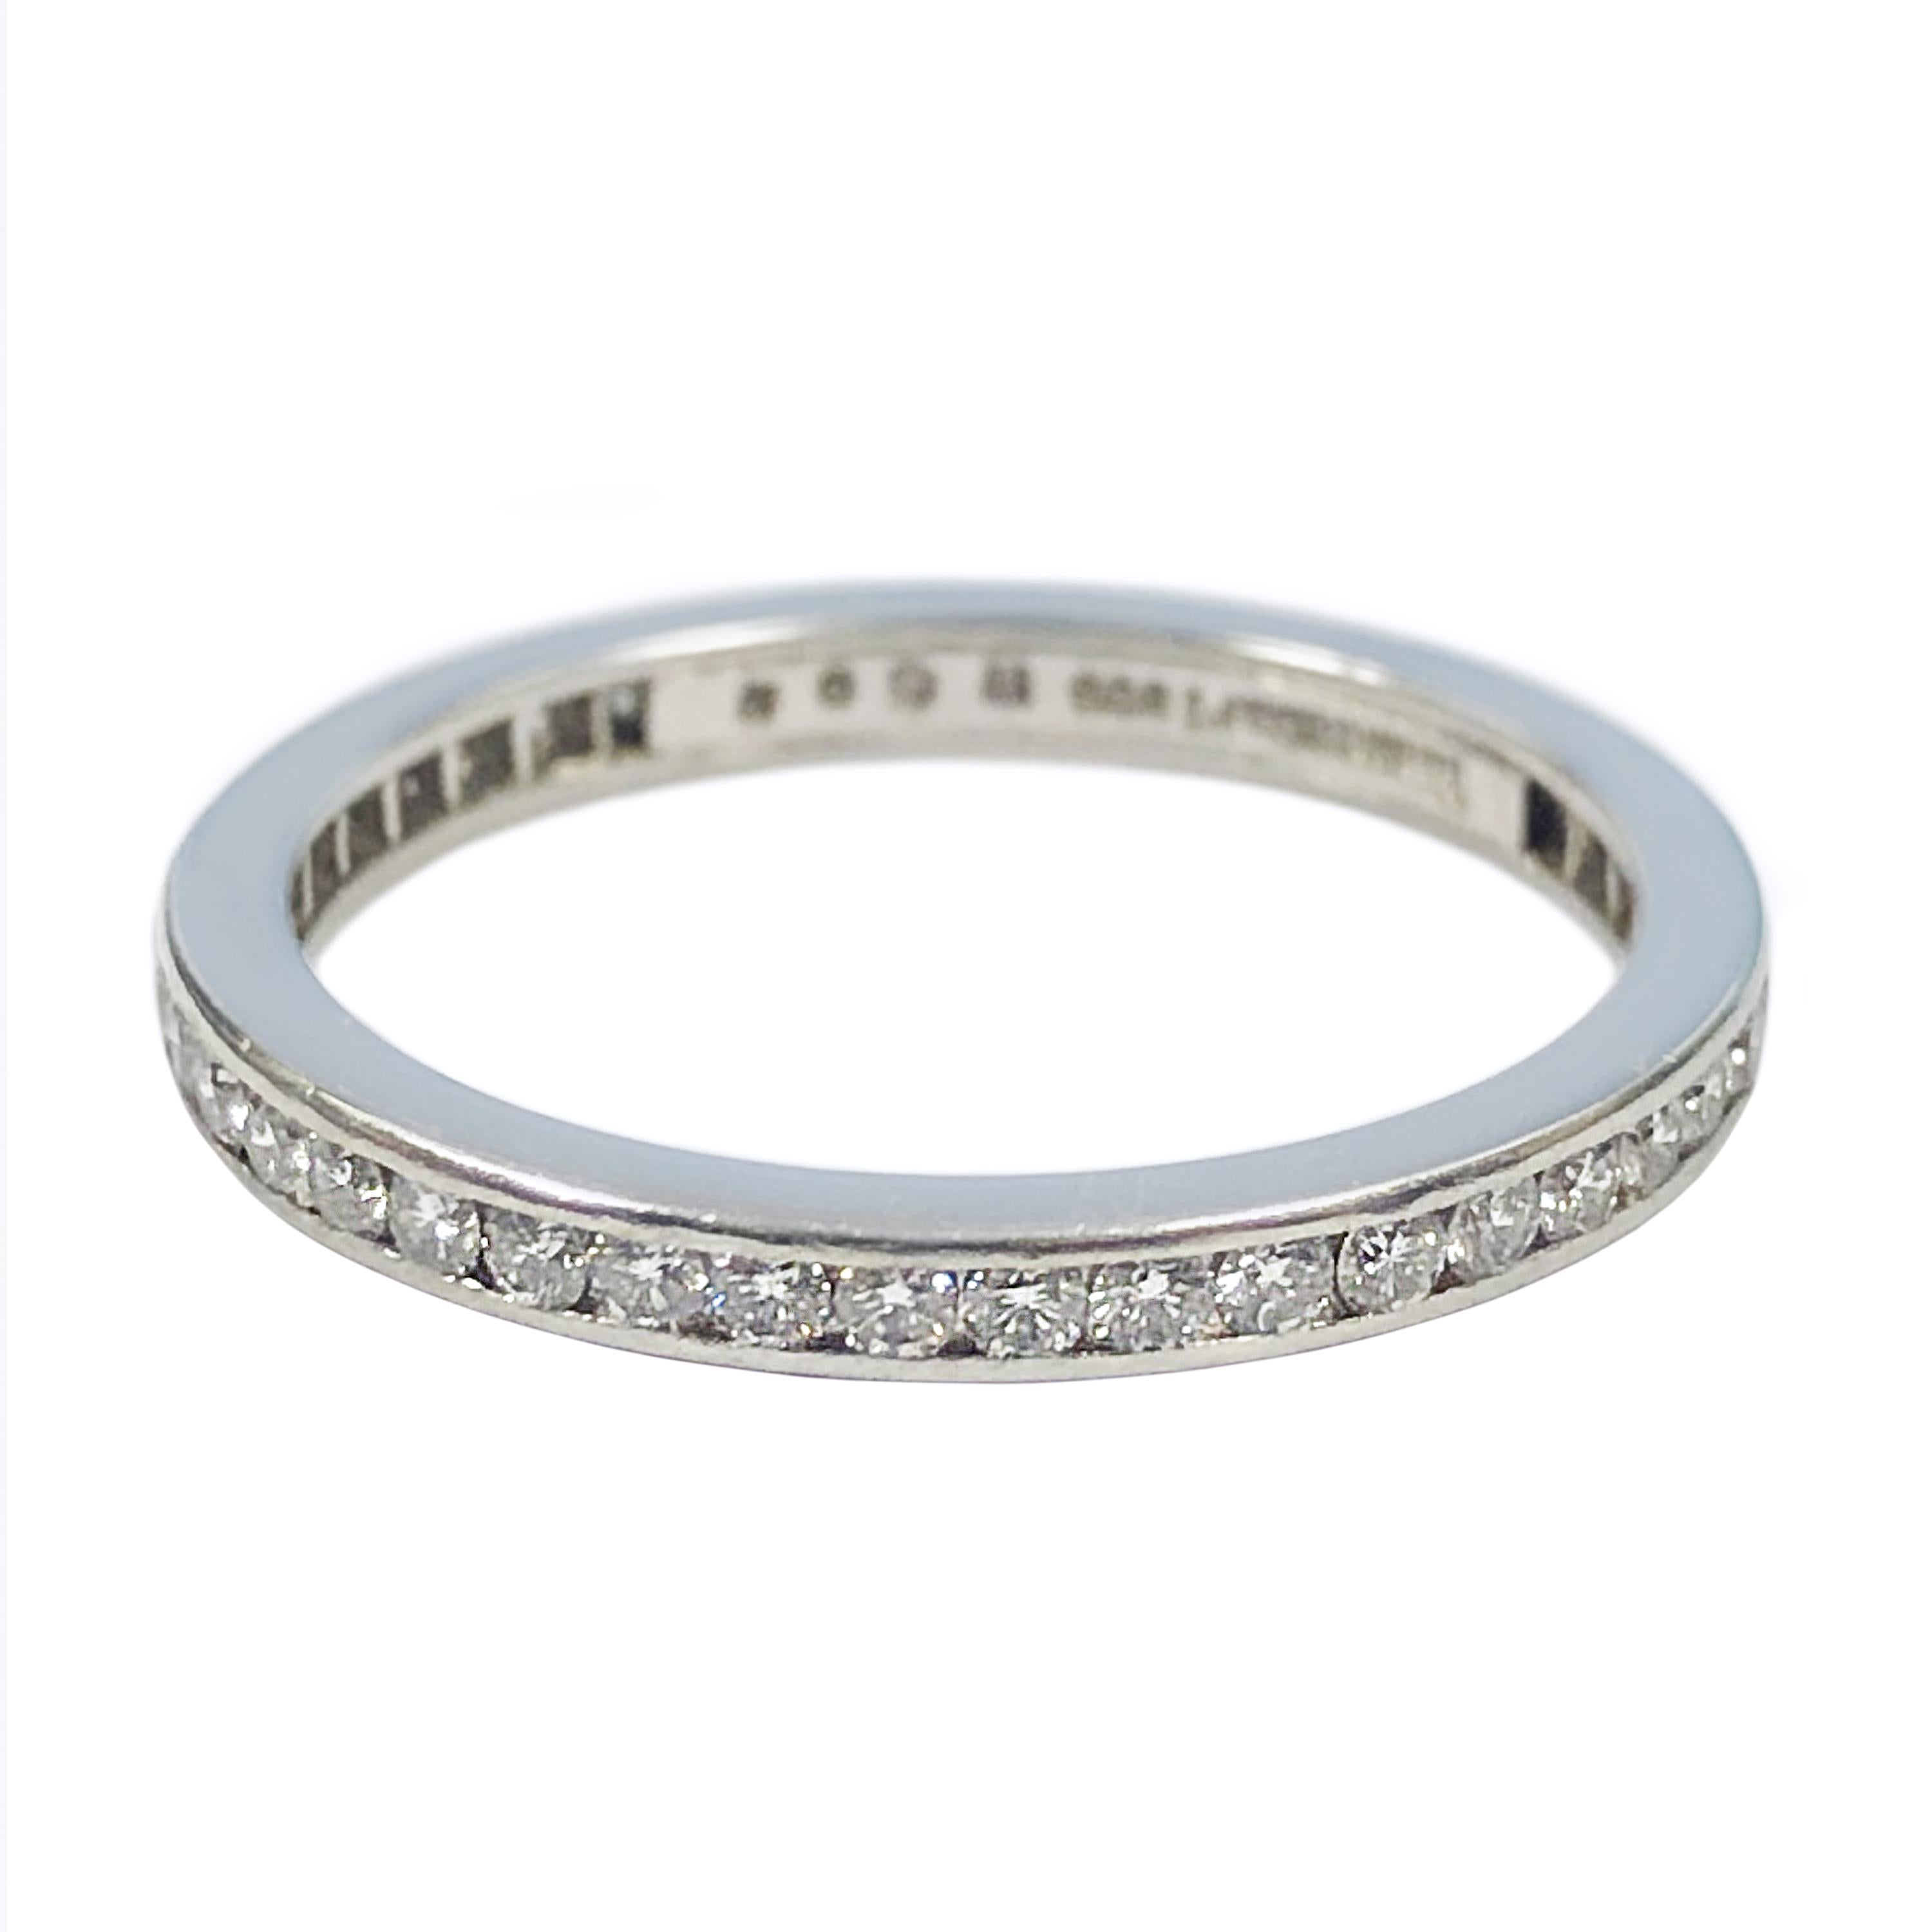 Circa 2010 Tiffany & Company 3 M.M. wide Eternity Band Ring, channel set with round brilliant cut Diamonds totaling 1 Carat.  Finger size 7.